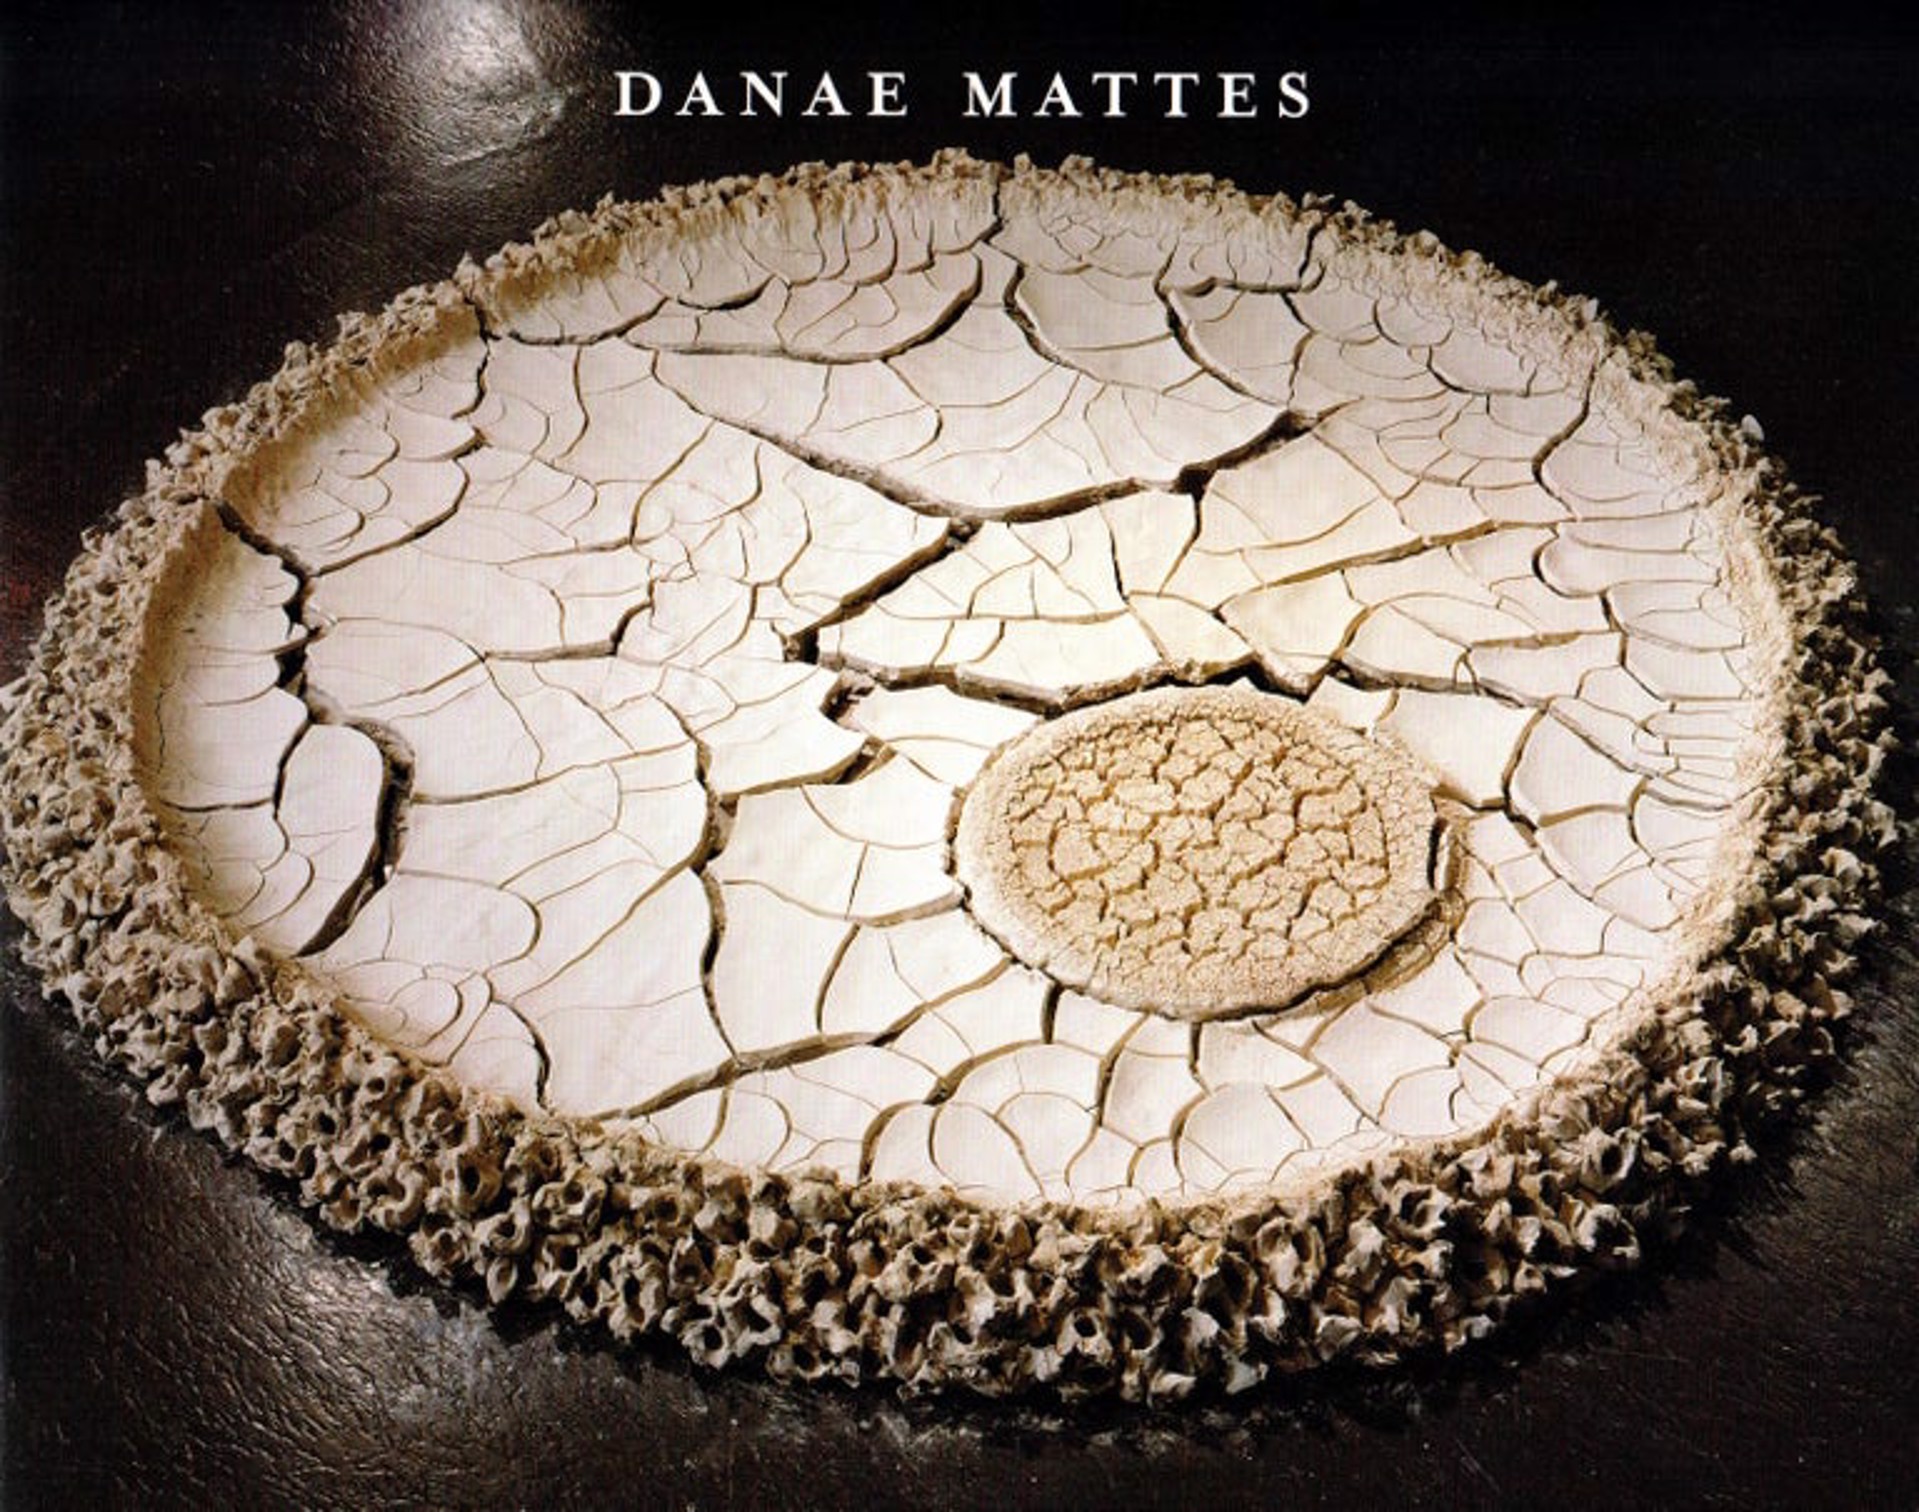 Danae Mattes: The Sibyl Series and Other Permeable Objects by Danae Mattes